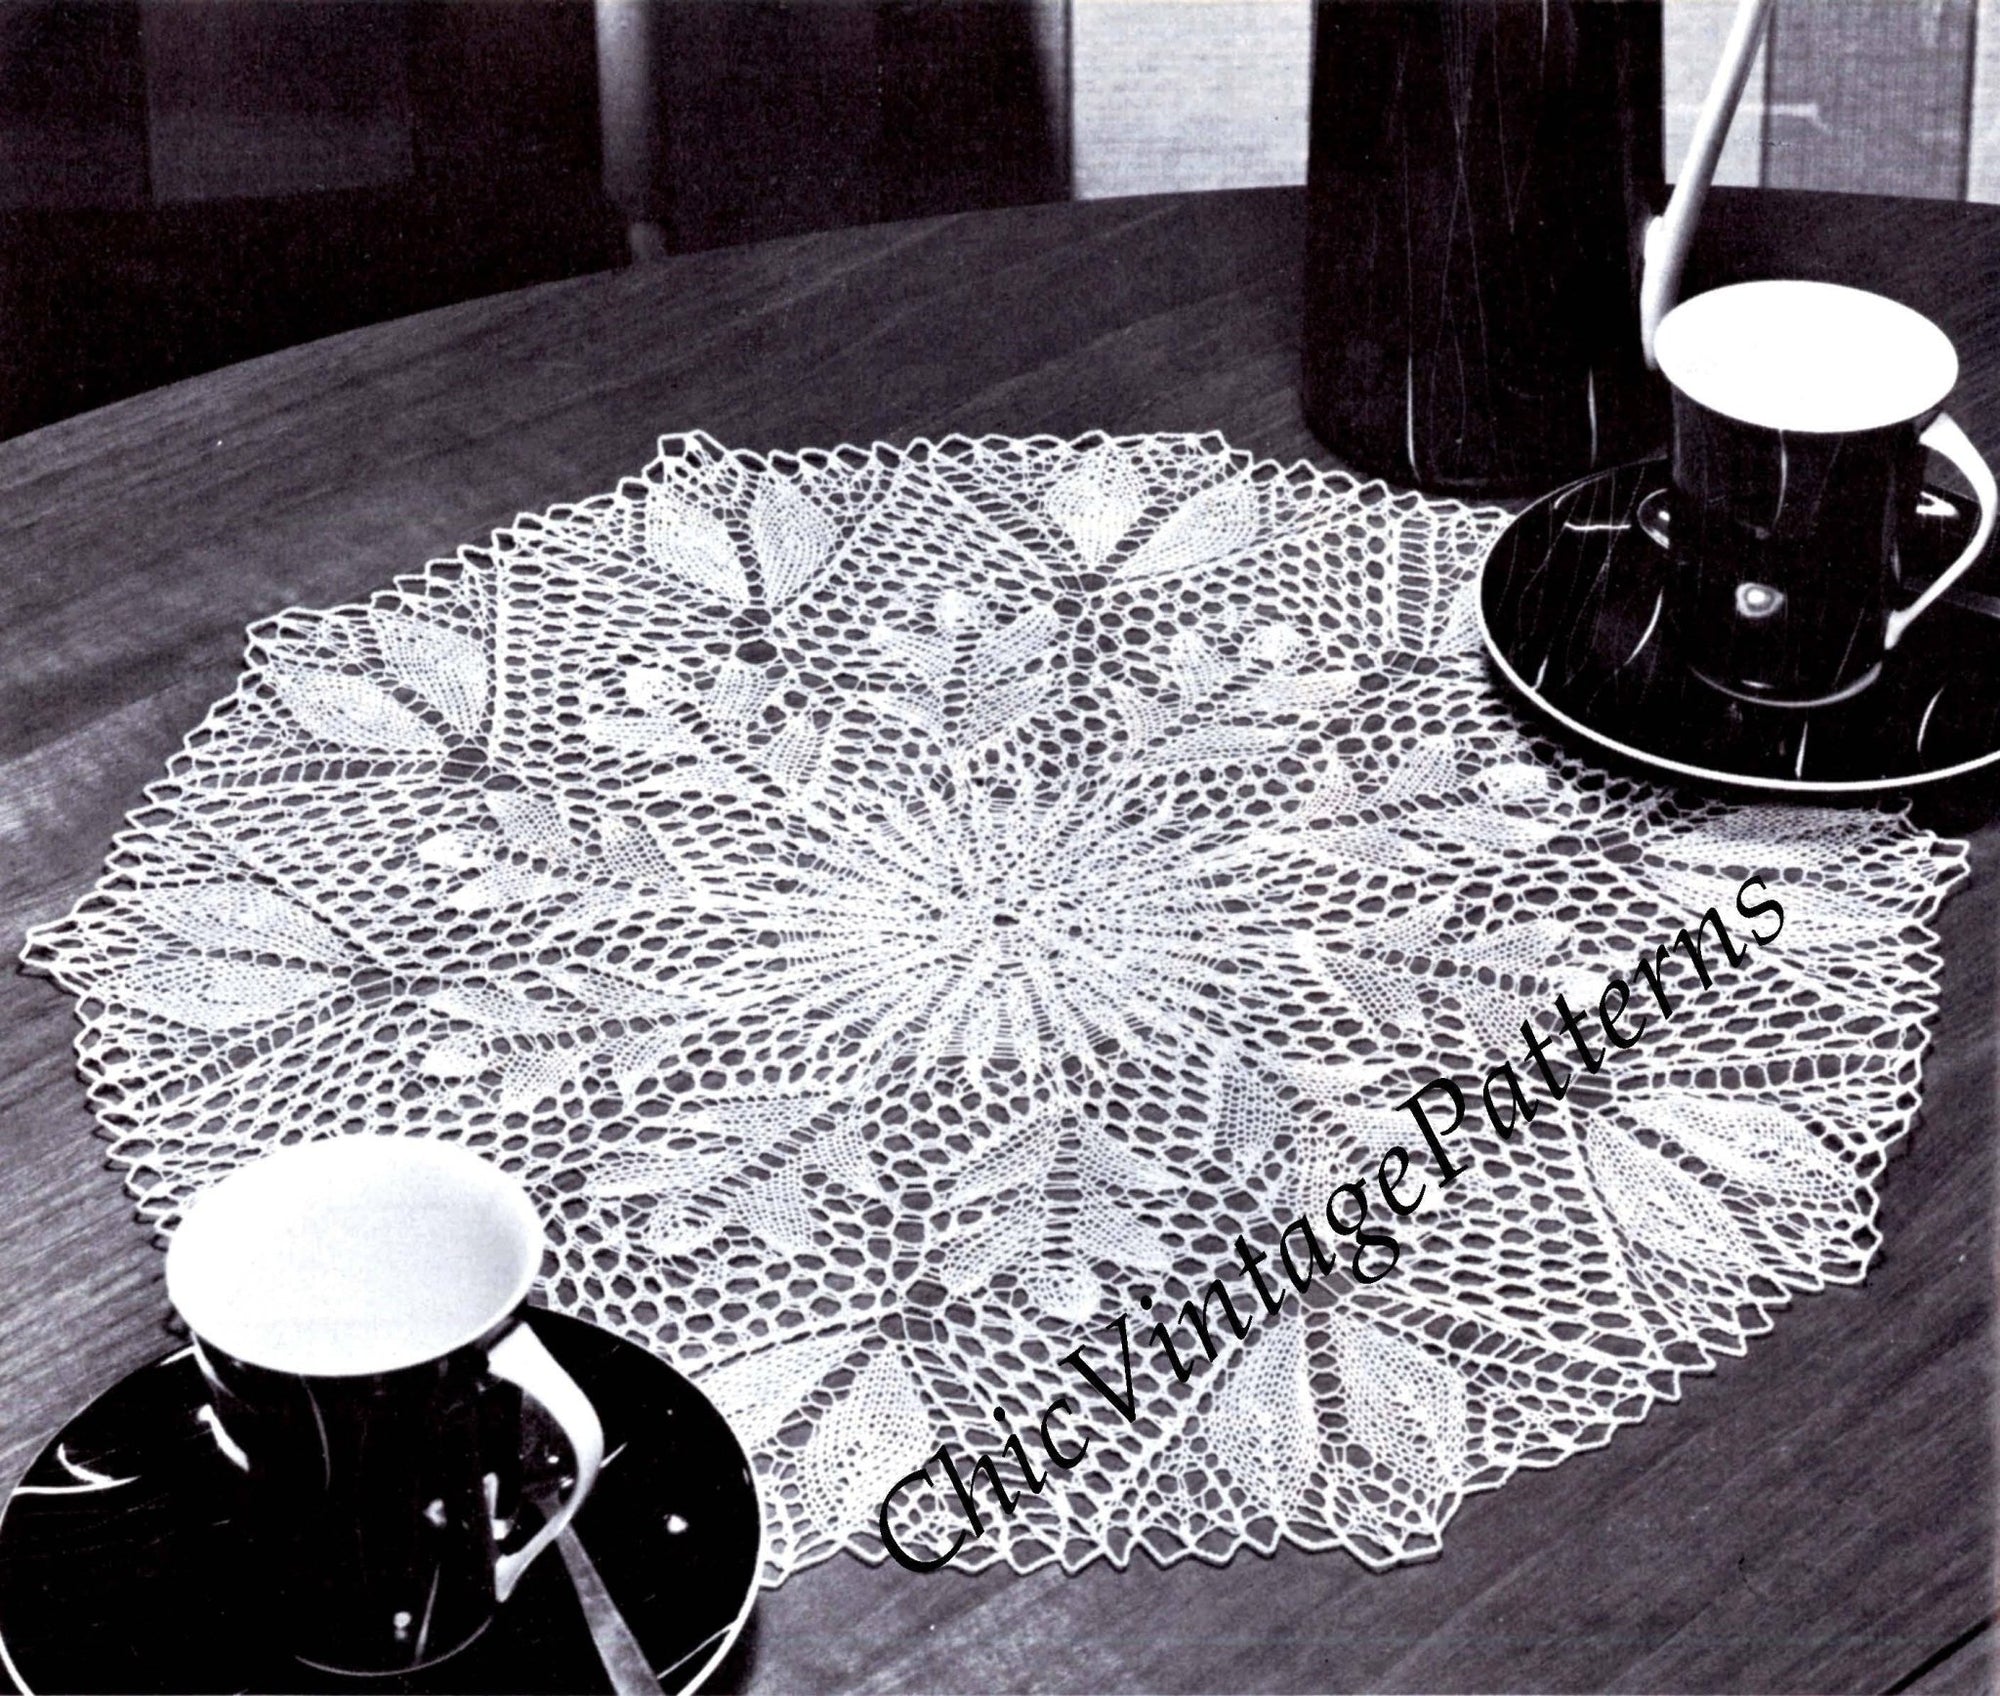 Knitted Lace Doily Digital Pattern, Vintage Table Centrepiece, Instant Download